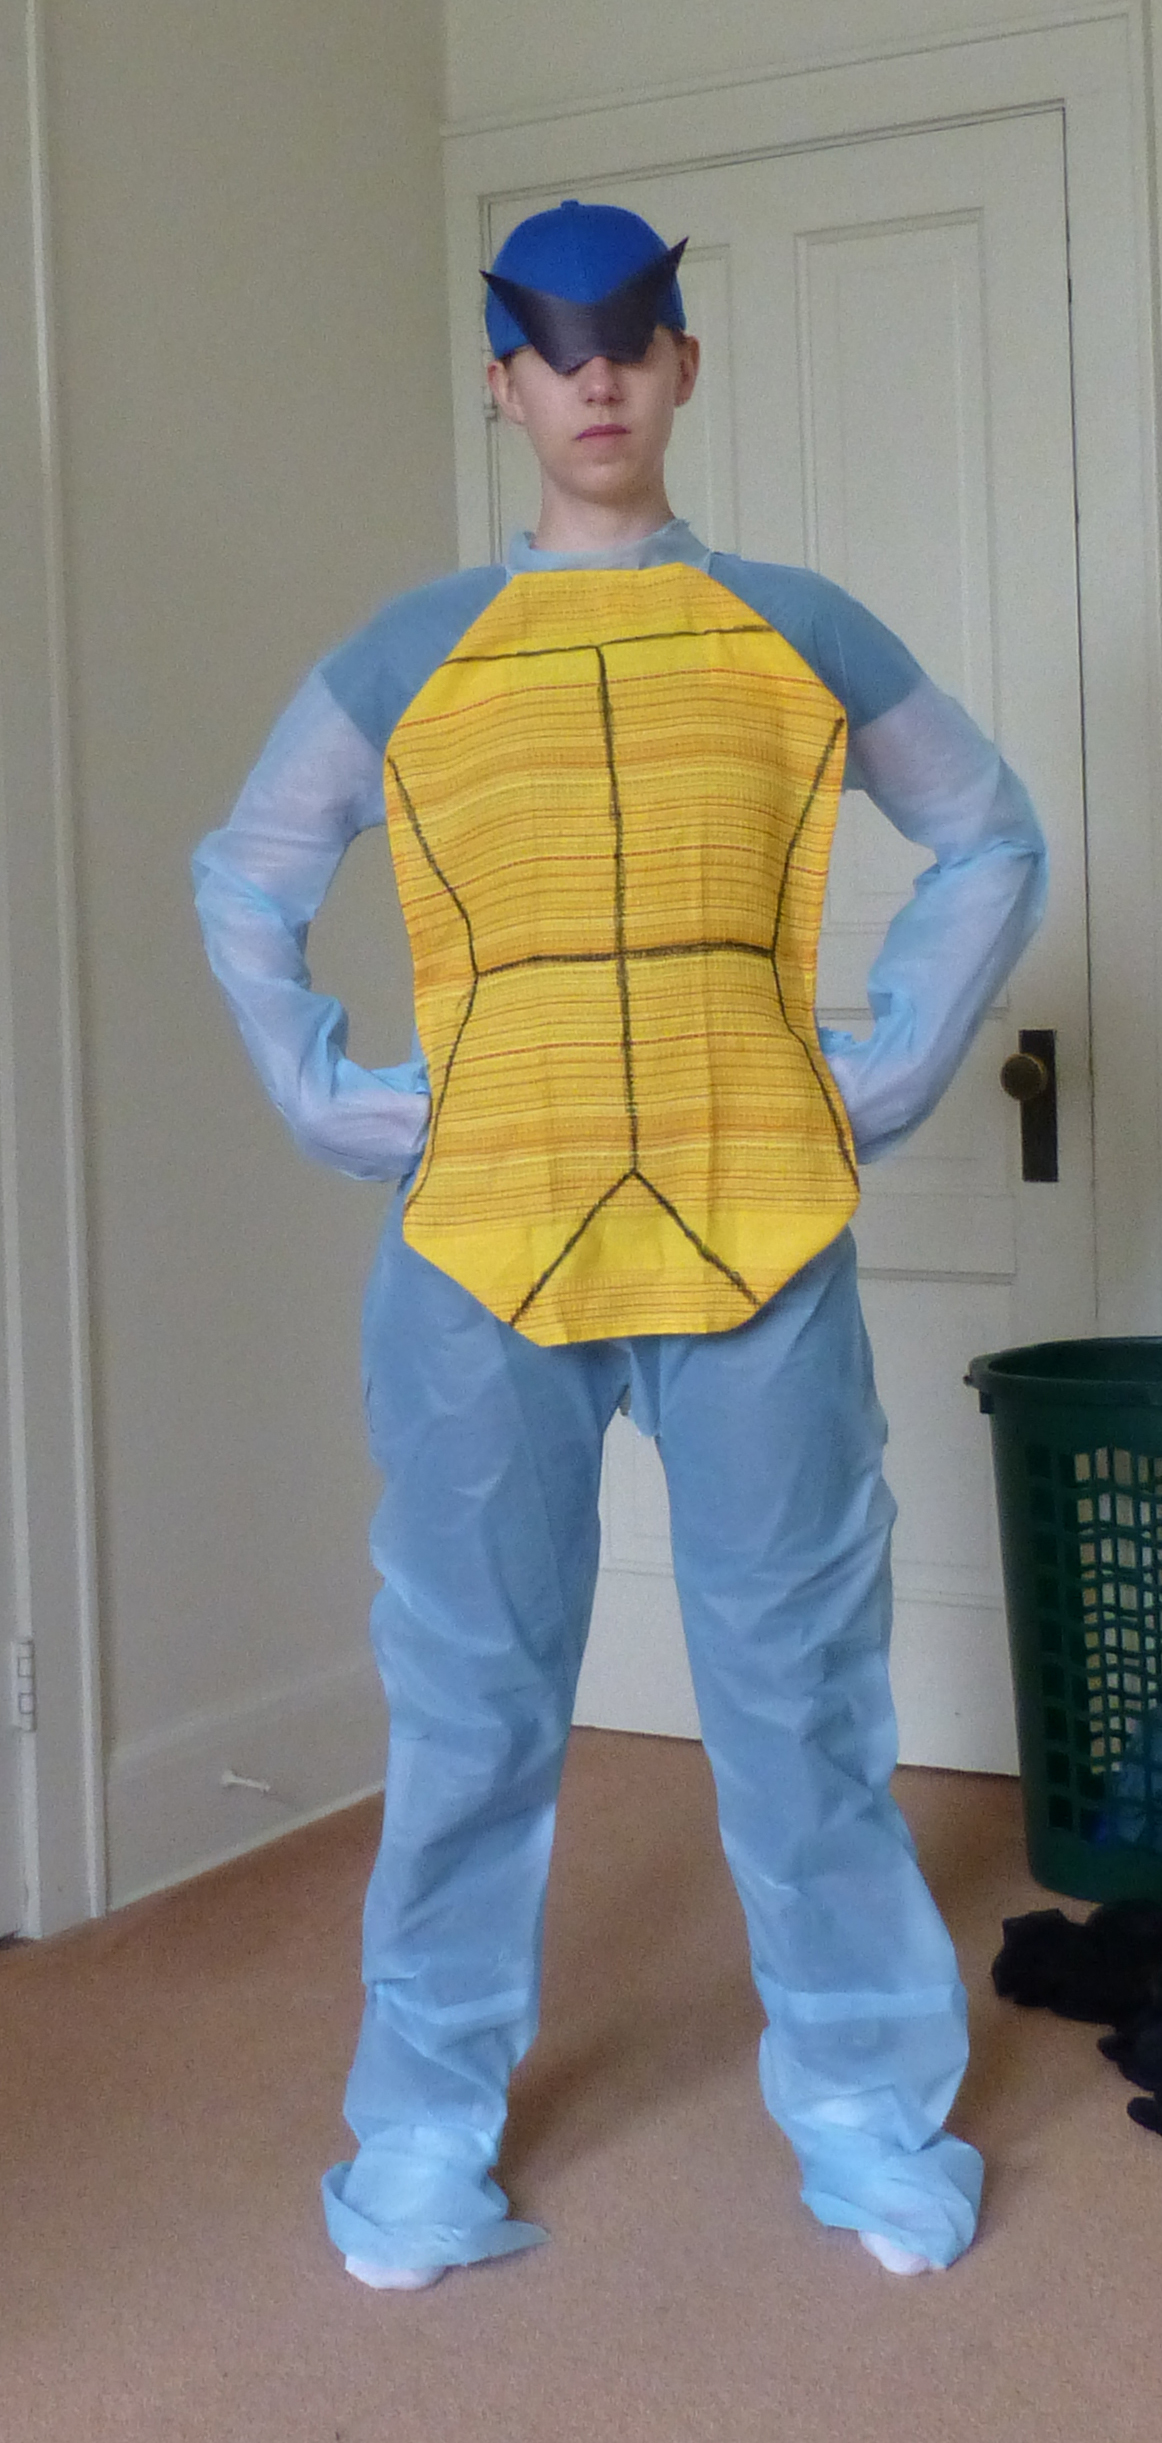 Squirtle Dollar Store cosplay challenge